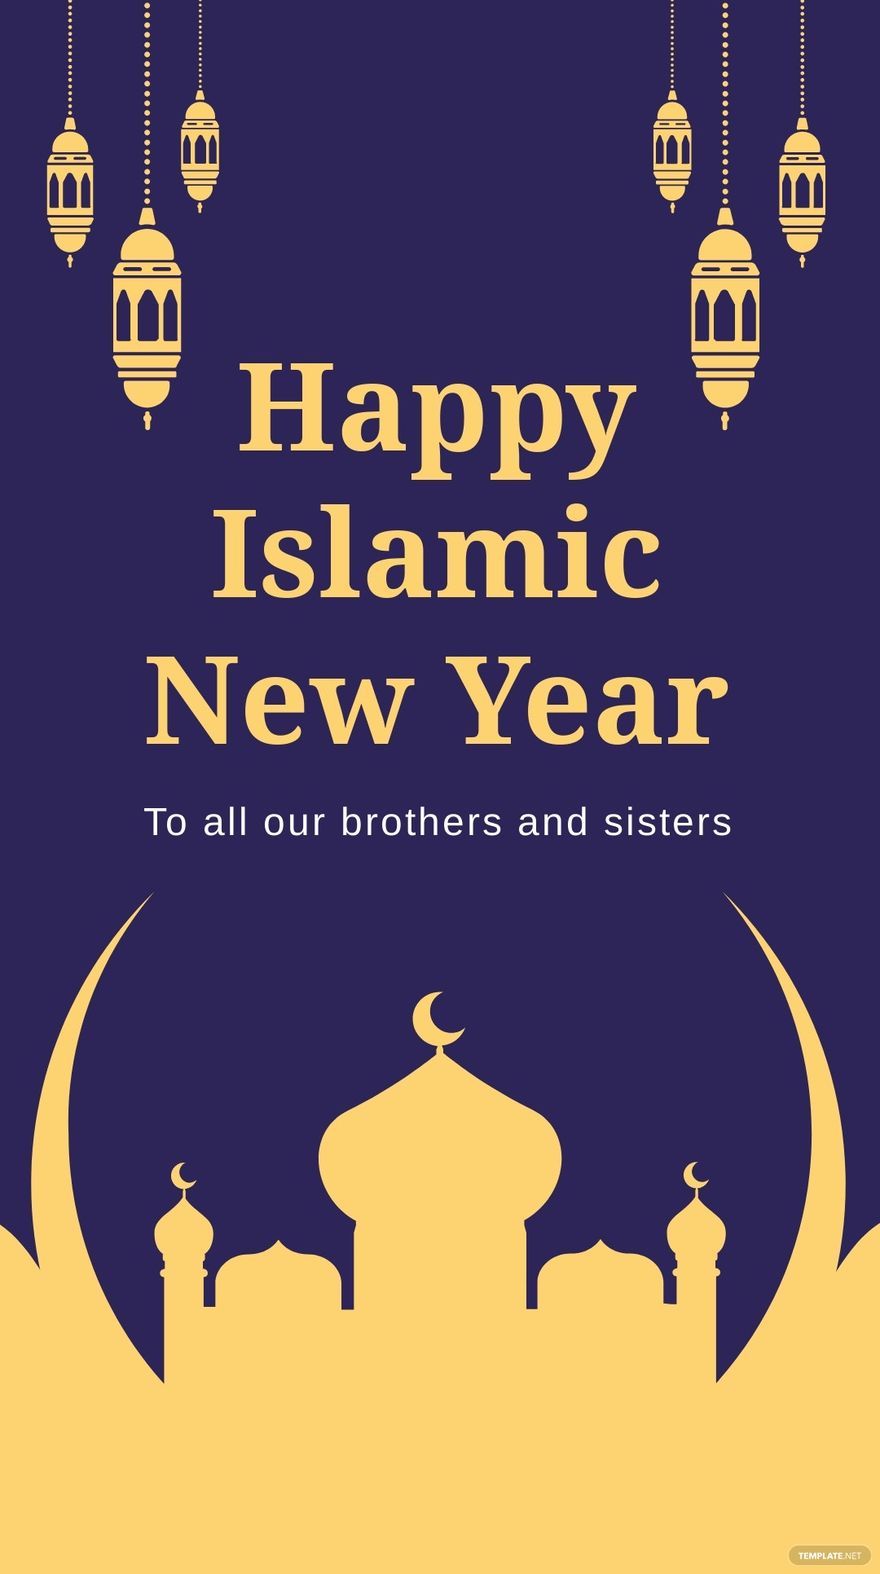 Free Islamic New Year Instagram Story Template in Illustrator, PSD